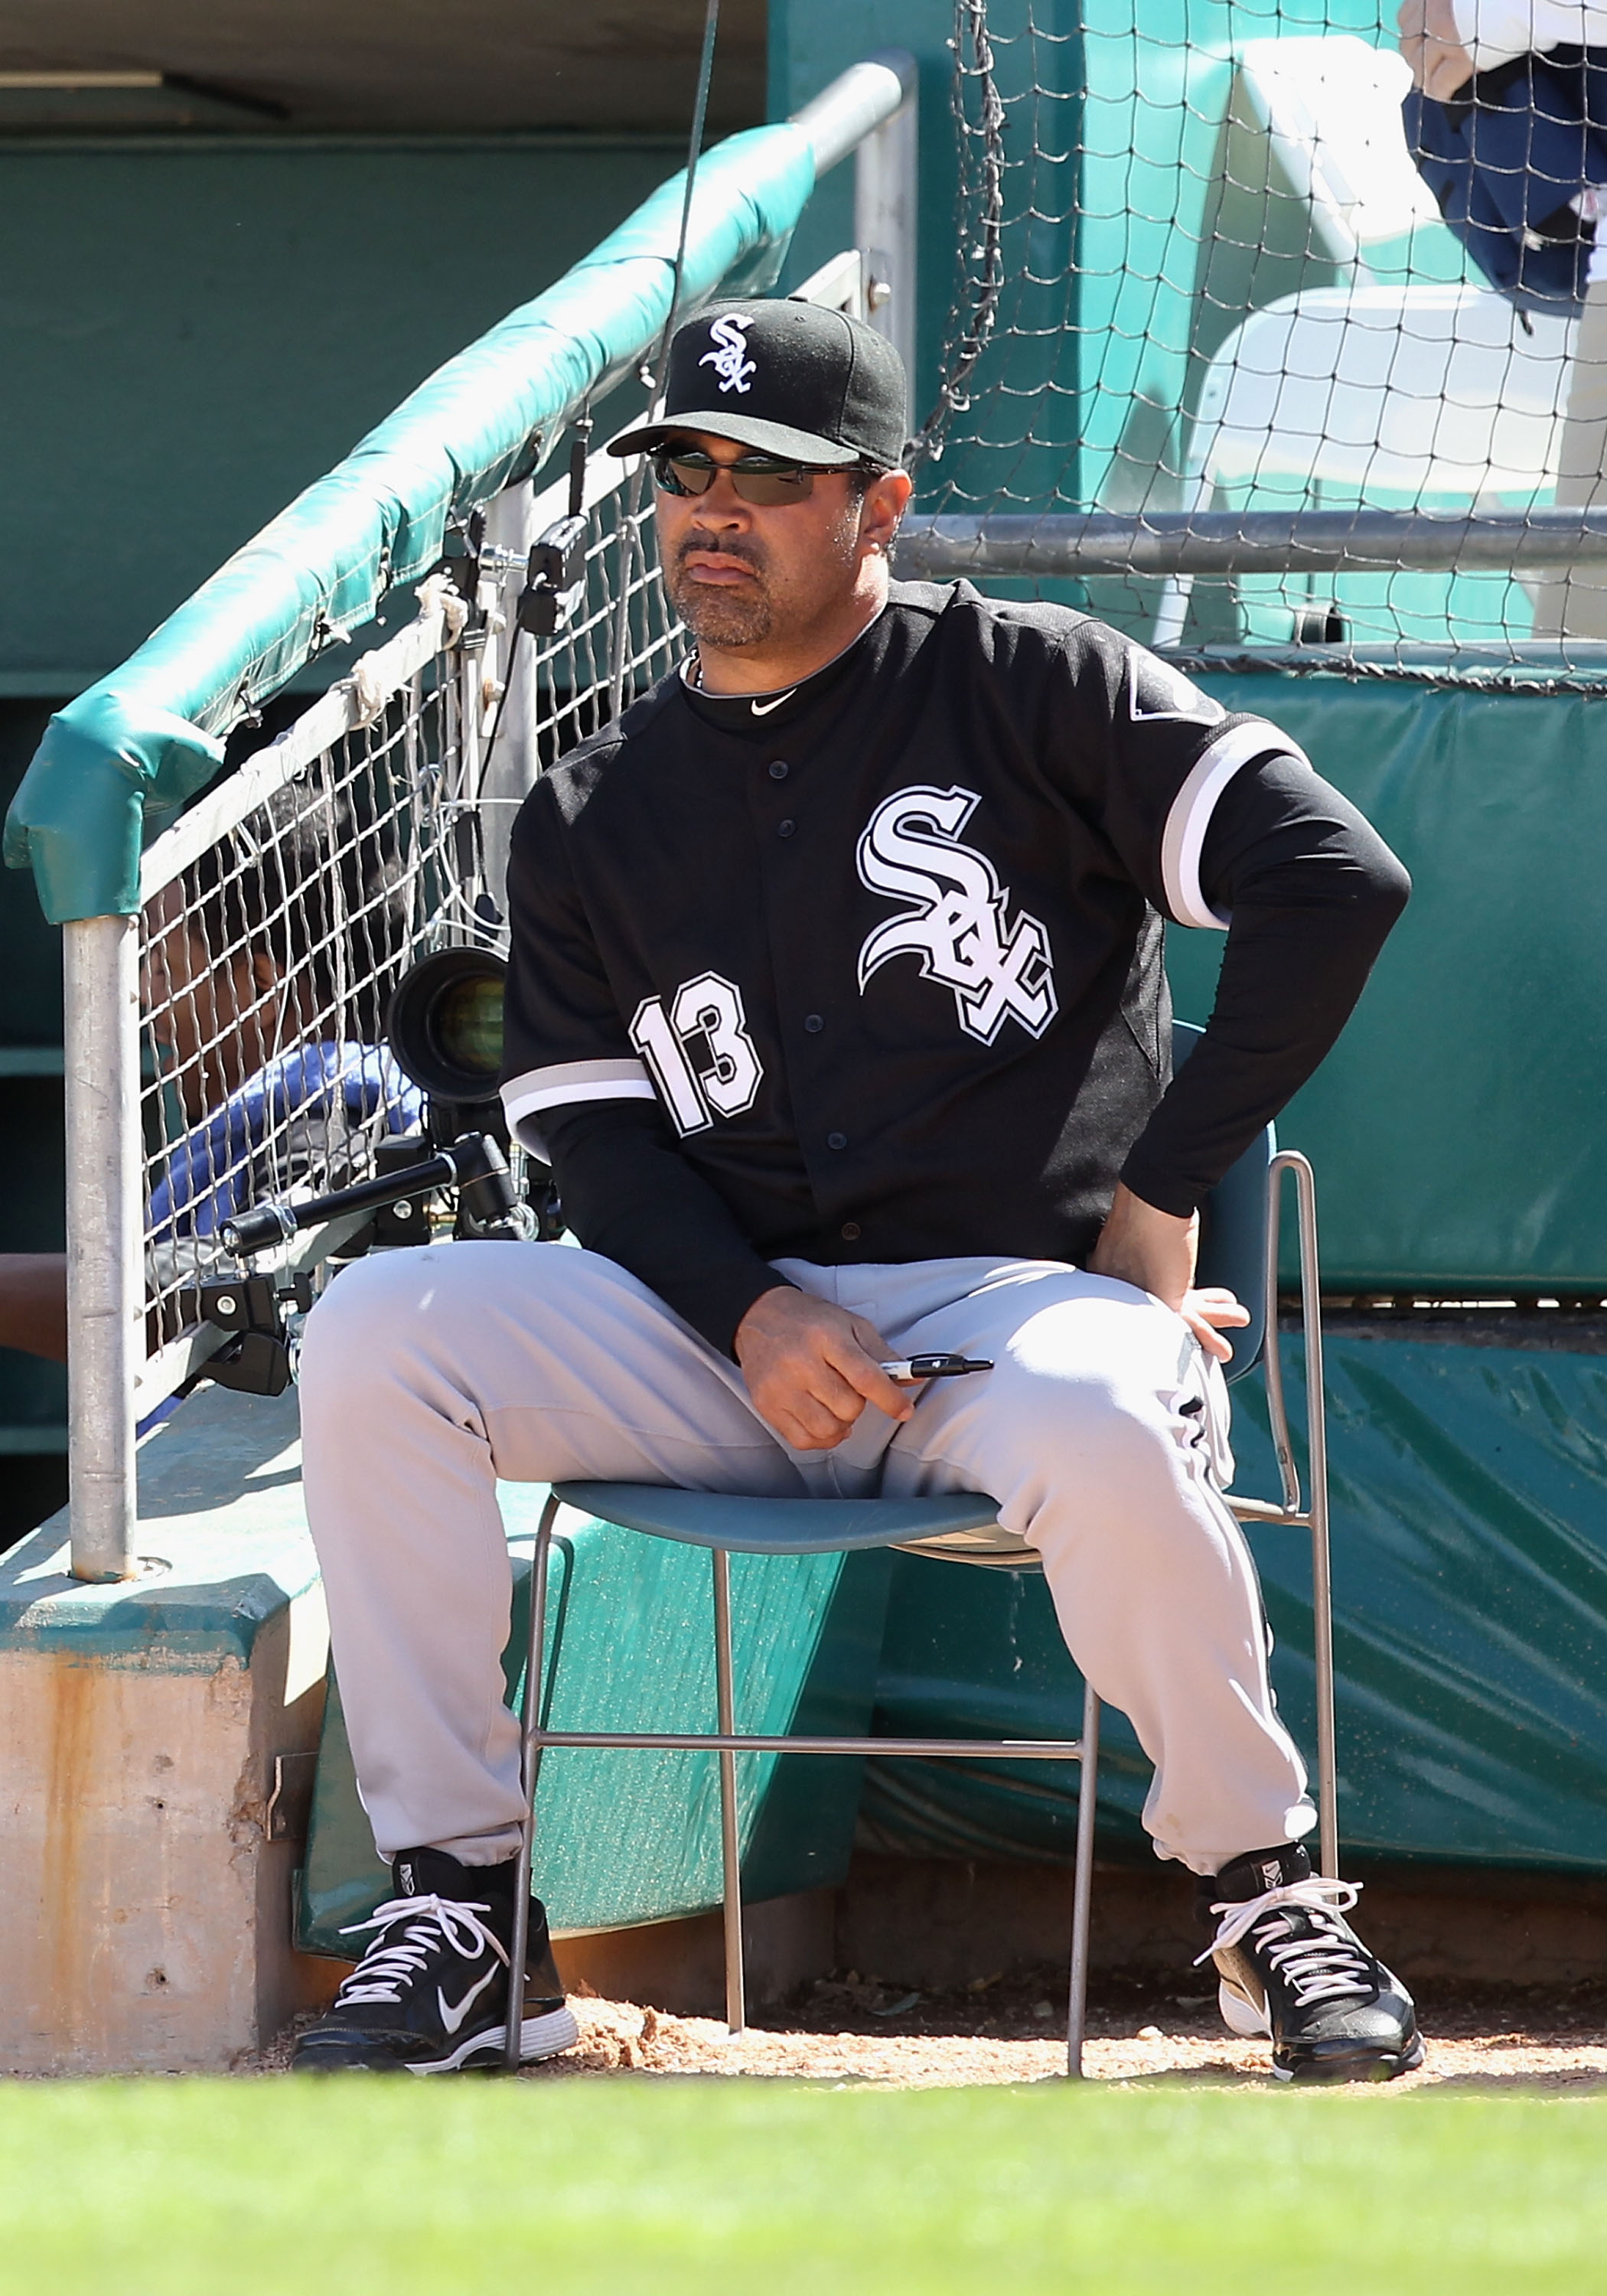 TUCSON, AZ - MARCH 07:  Manager Ozzie Guillen #13 of the Chicago White Sox during the spring training game against the Arizona Diamondbacks at Kino Veterans Memorial Stadium on March 7, 2011 in Tucson, Arizona.  (Photo by Christian Petersen/Getty Images)